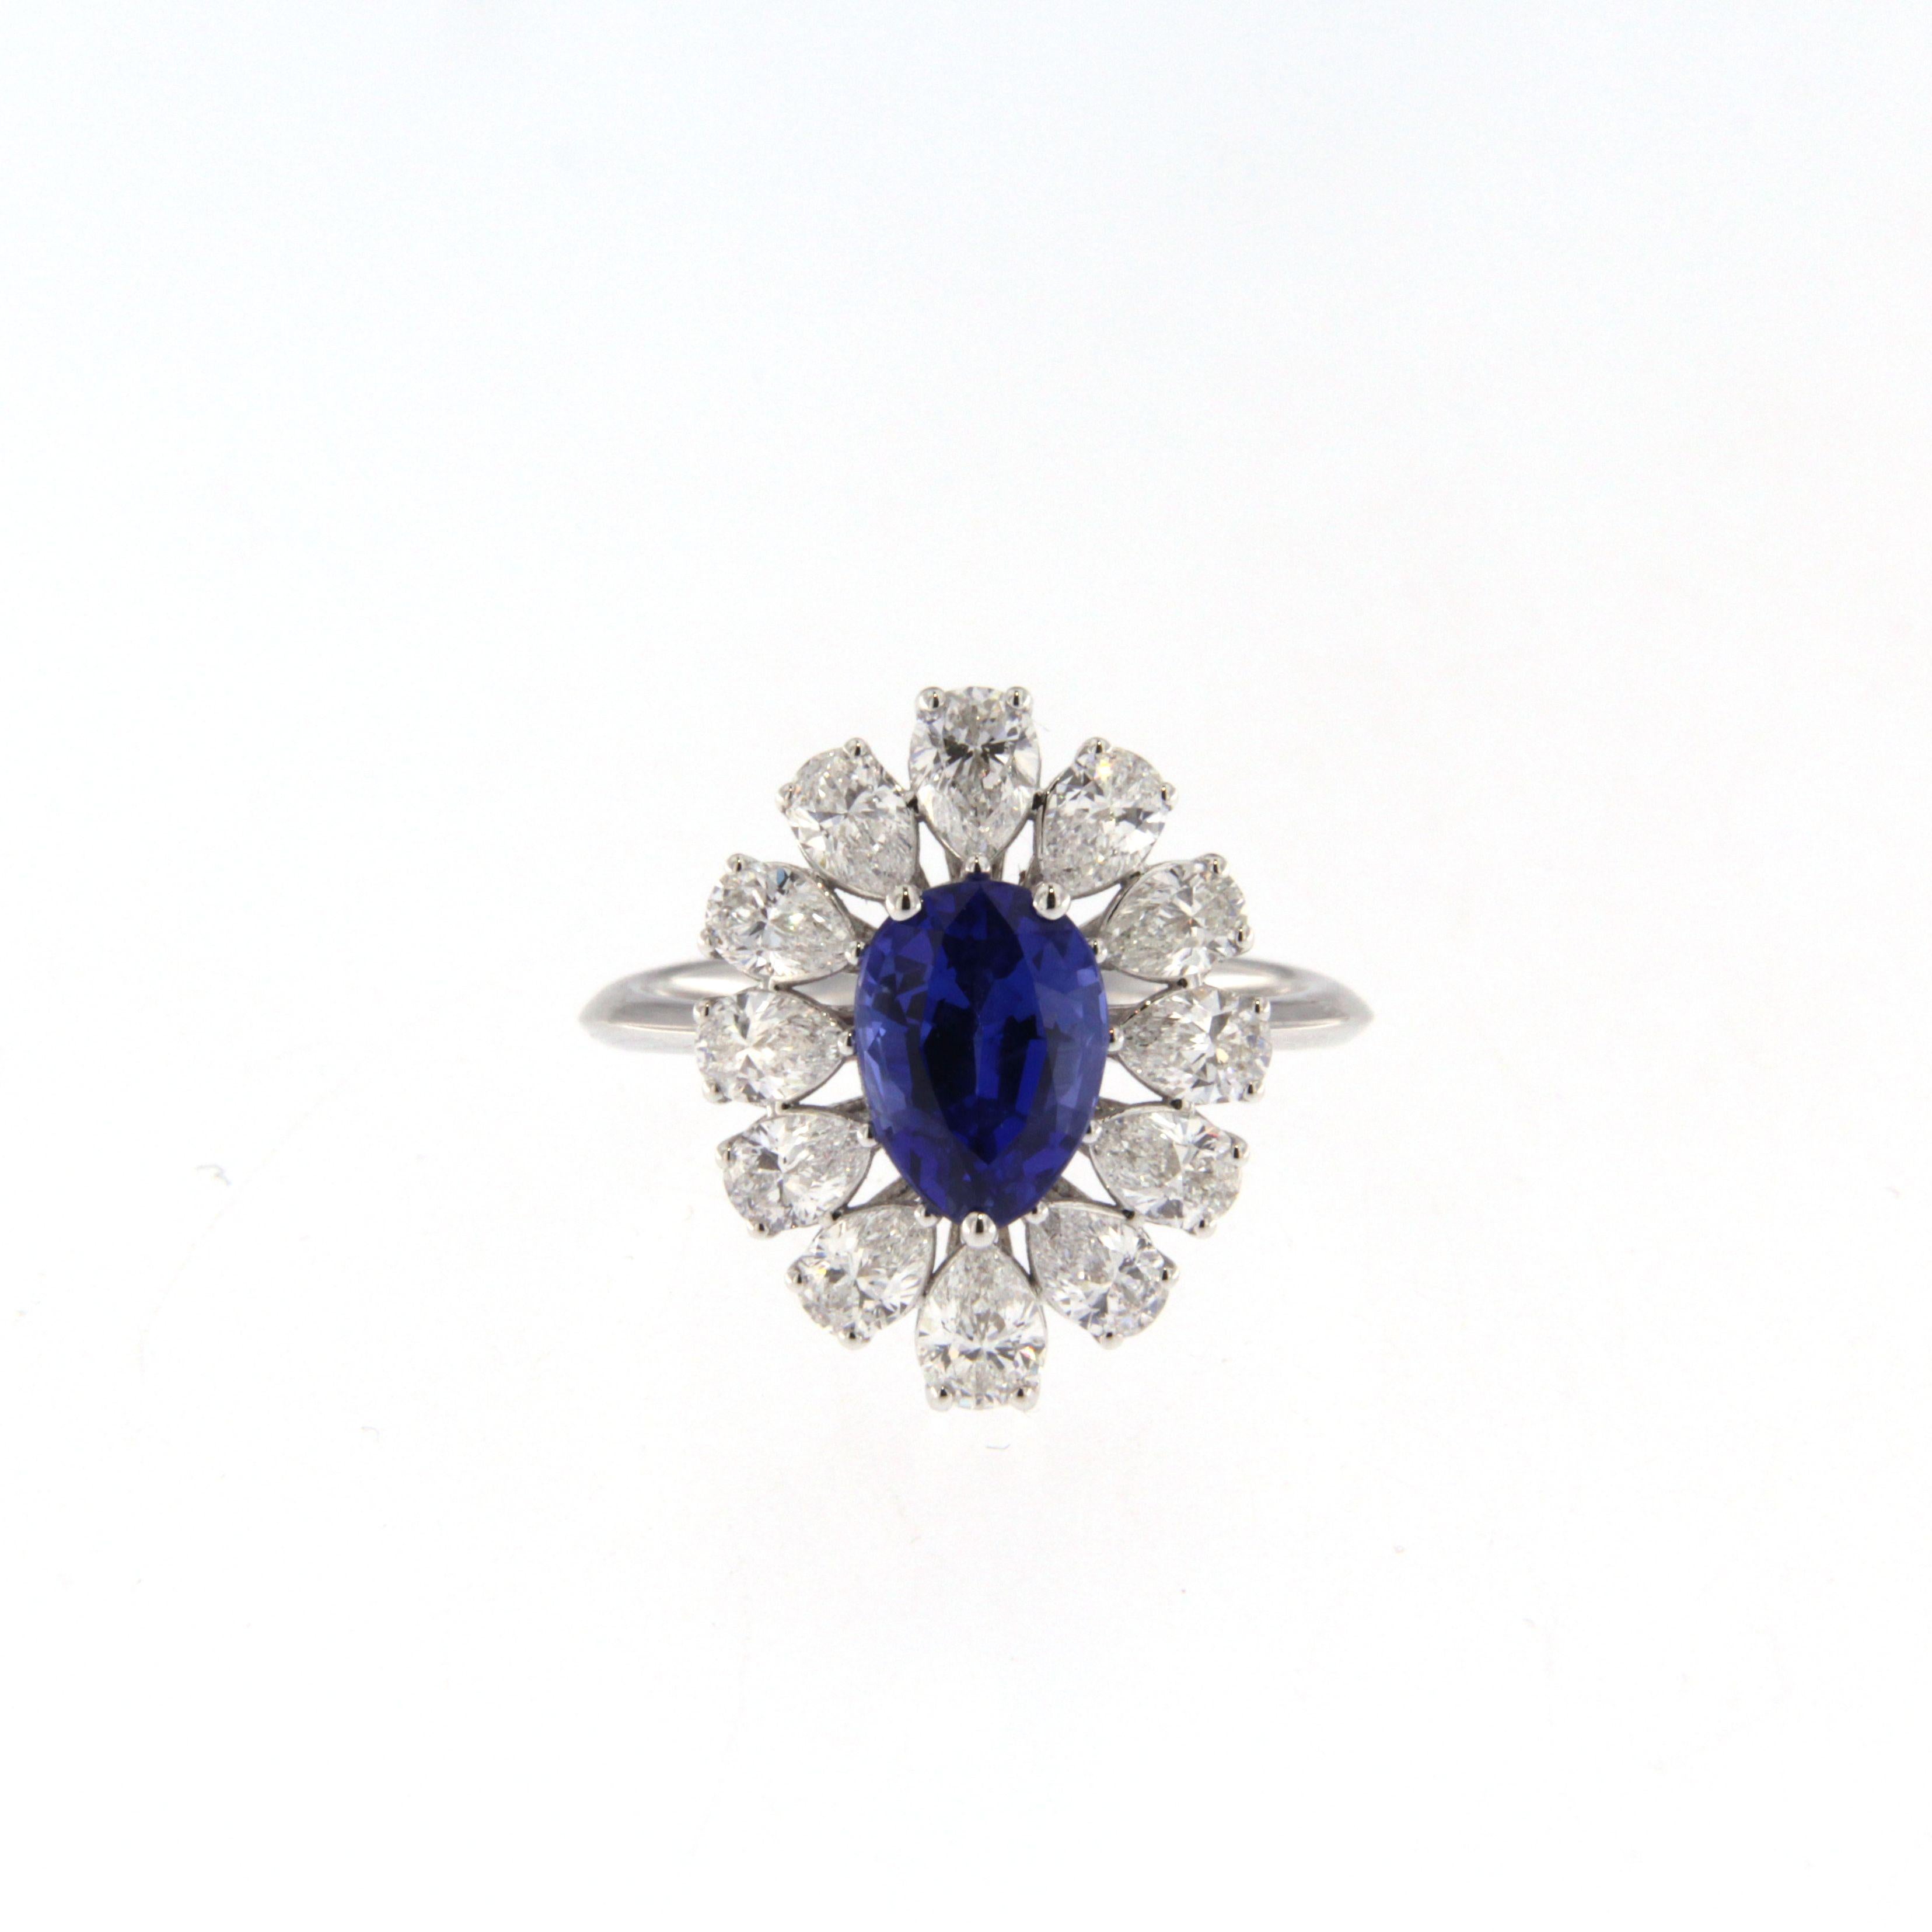 The ring is realized in 18Kt white gold with a drop shaped natural blue sapphire ct.2.49 certified GECI and drop shaped diamonds total ct.1.80

TECHNICAL DETAILS

18Kt white gold
2.49 ct drop cut natural blue sapphire no heated ceritfied GECI
1.80